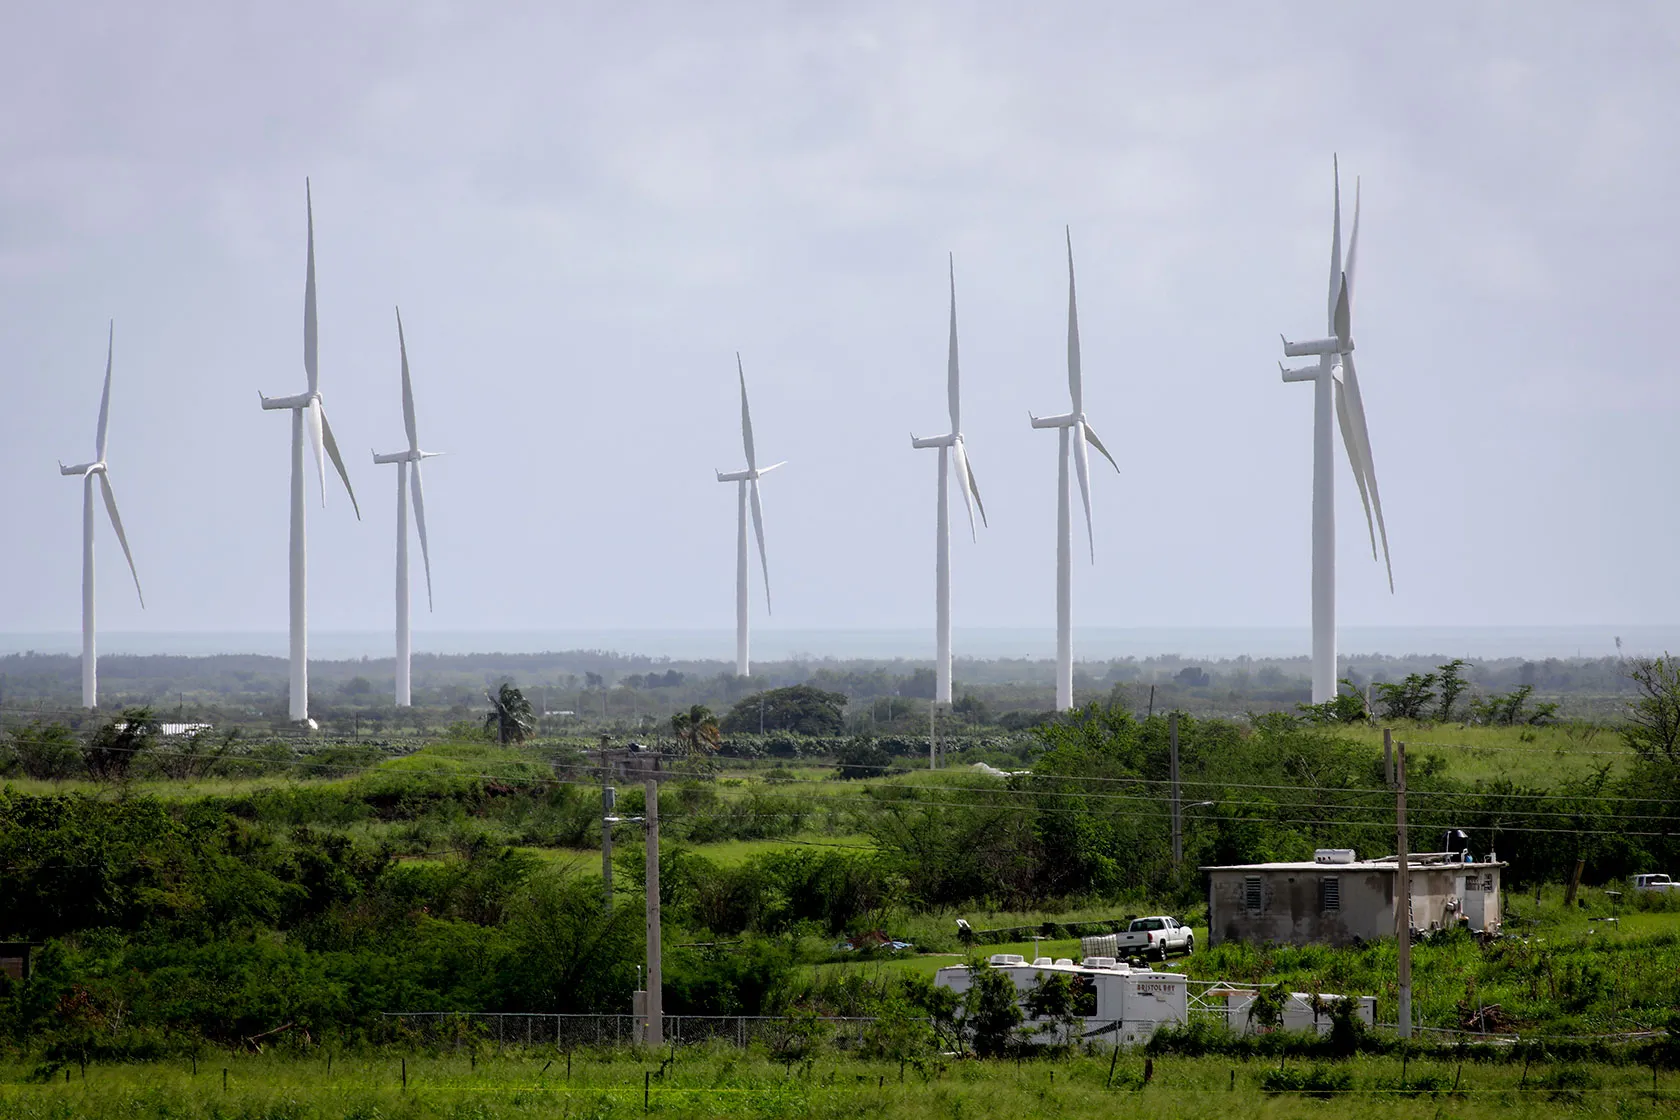 Photo shows tall white wind turbines rising above a green forest with a small house and power lines in the foreground.